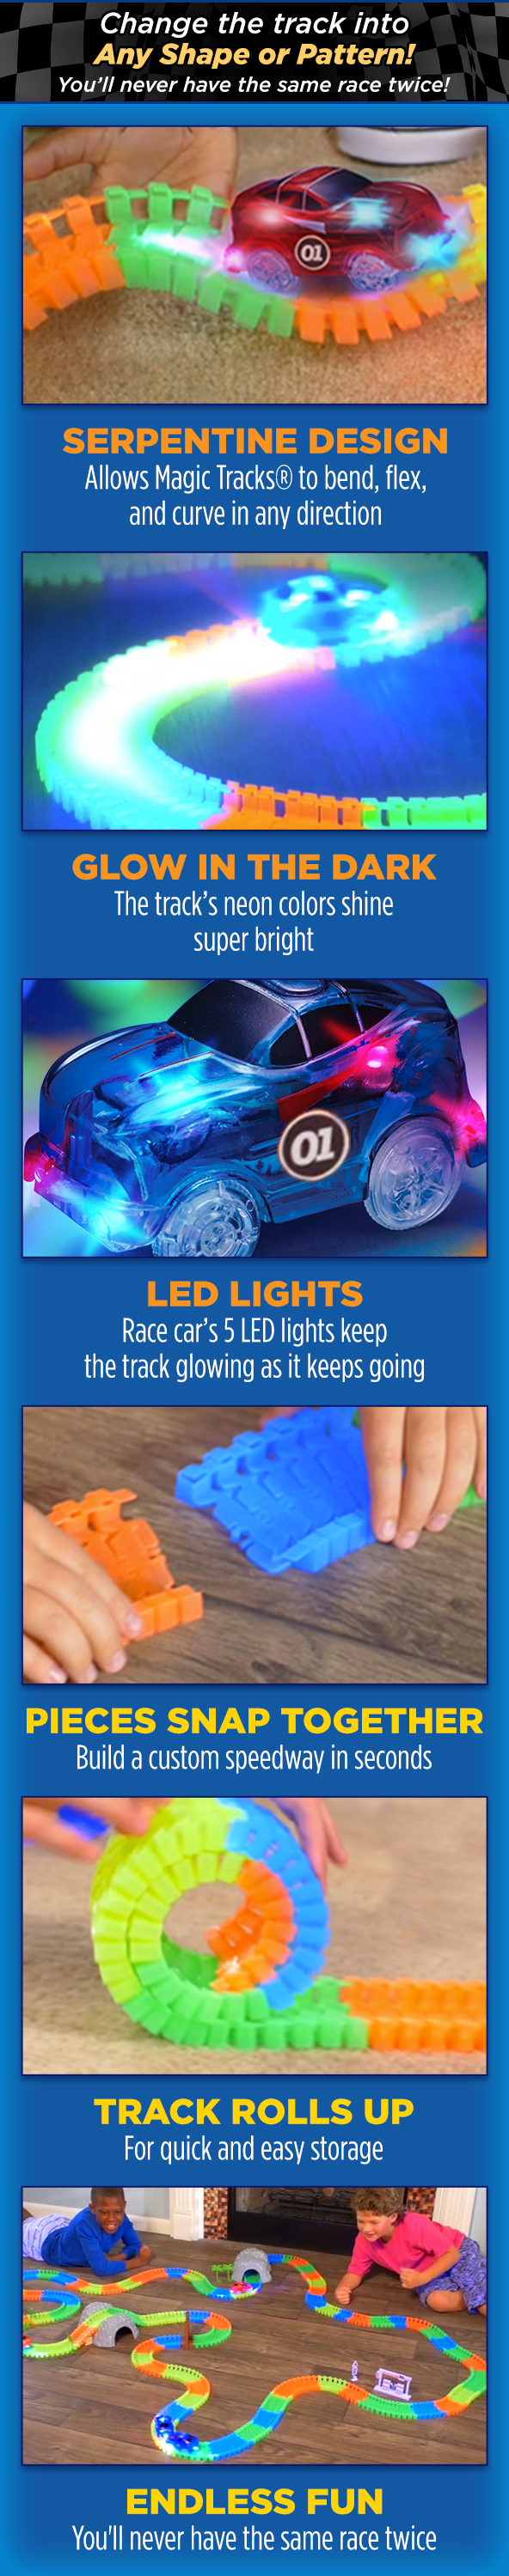 Ontel Magic Tracks Mega Set - 2 LED Race Cars and 18 ft. of Flexible,  Bendable Glow in the Dark Racetrack - As Seen on TV